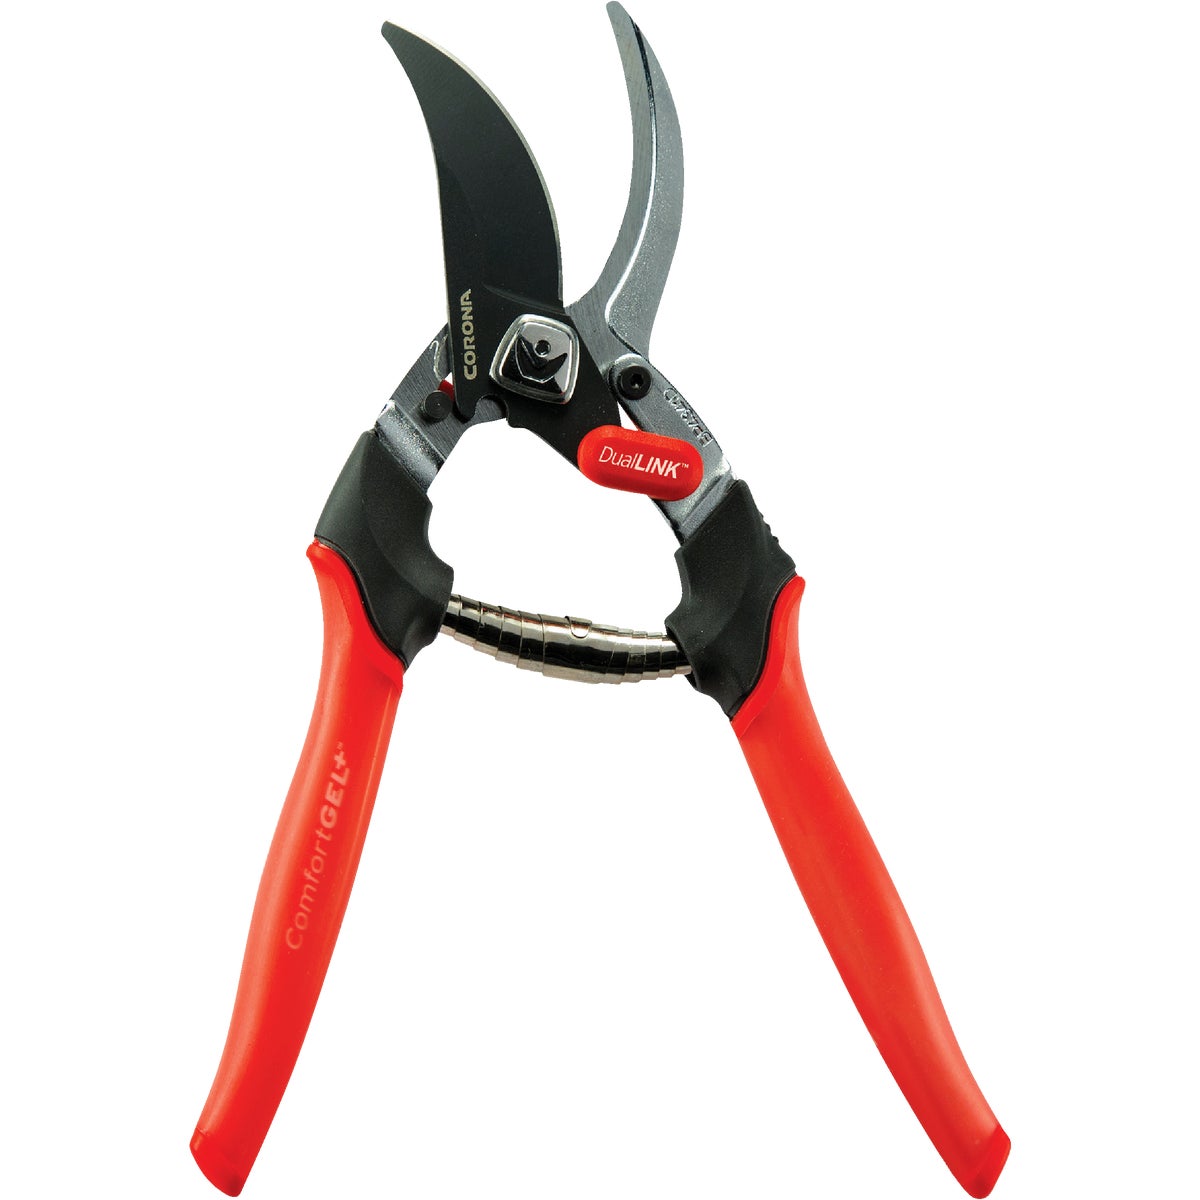 Item 704887, Branch and stem bypass pruner has a dual compound lever to provide added 